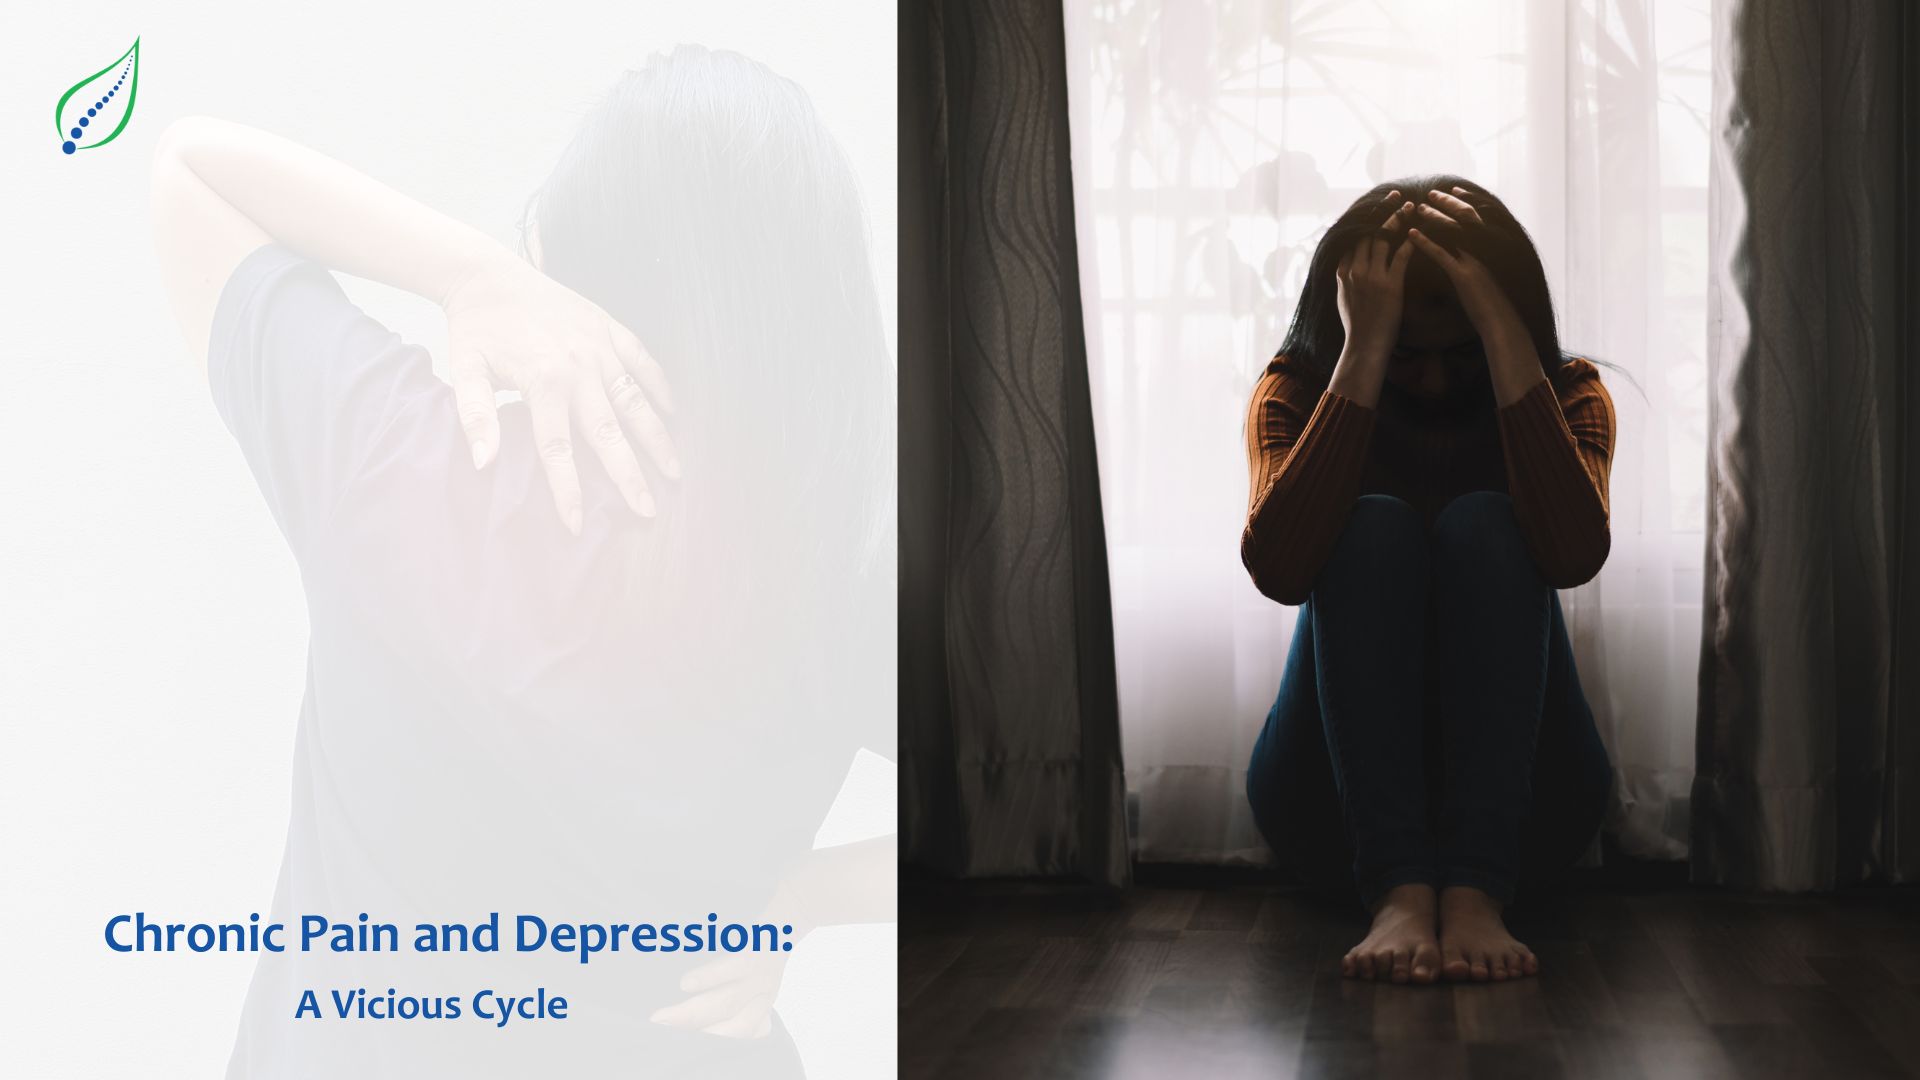 Chronic Pain and Depression: A Vicious Cycle